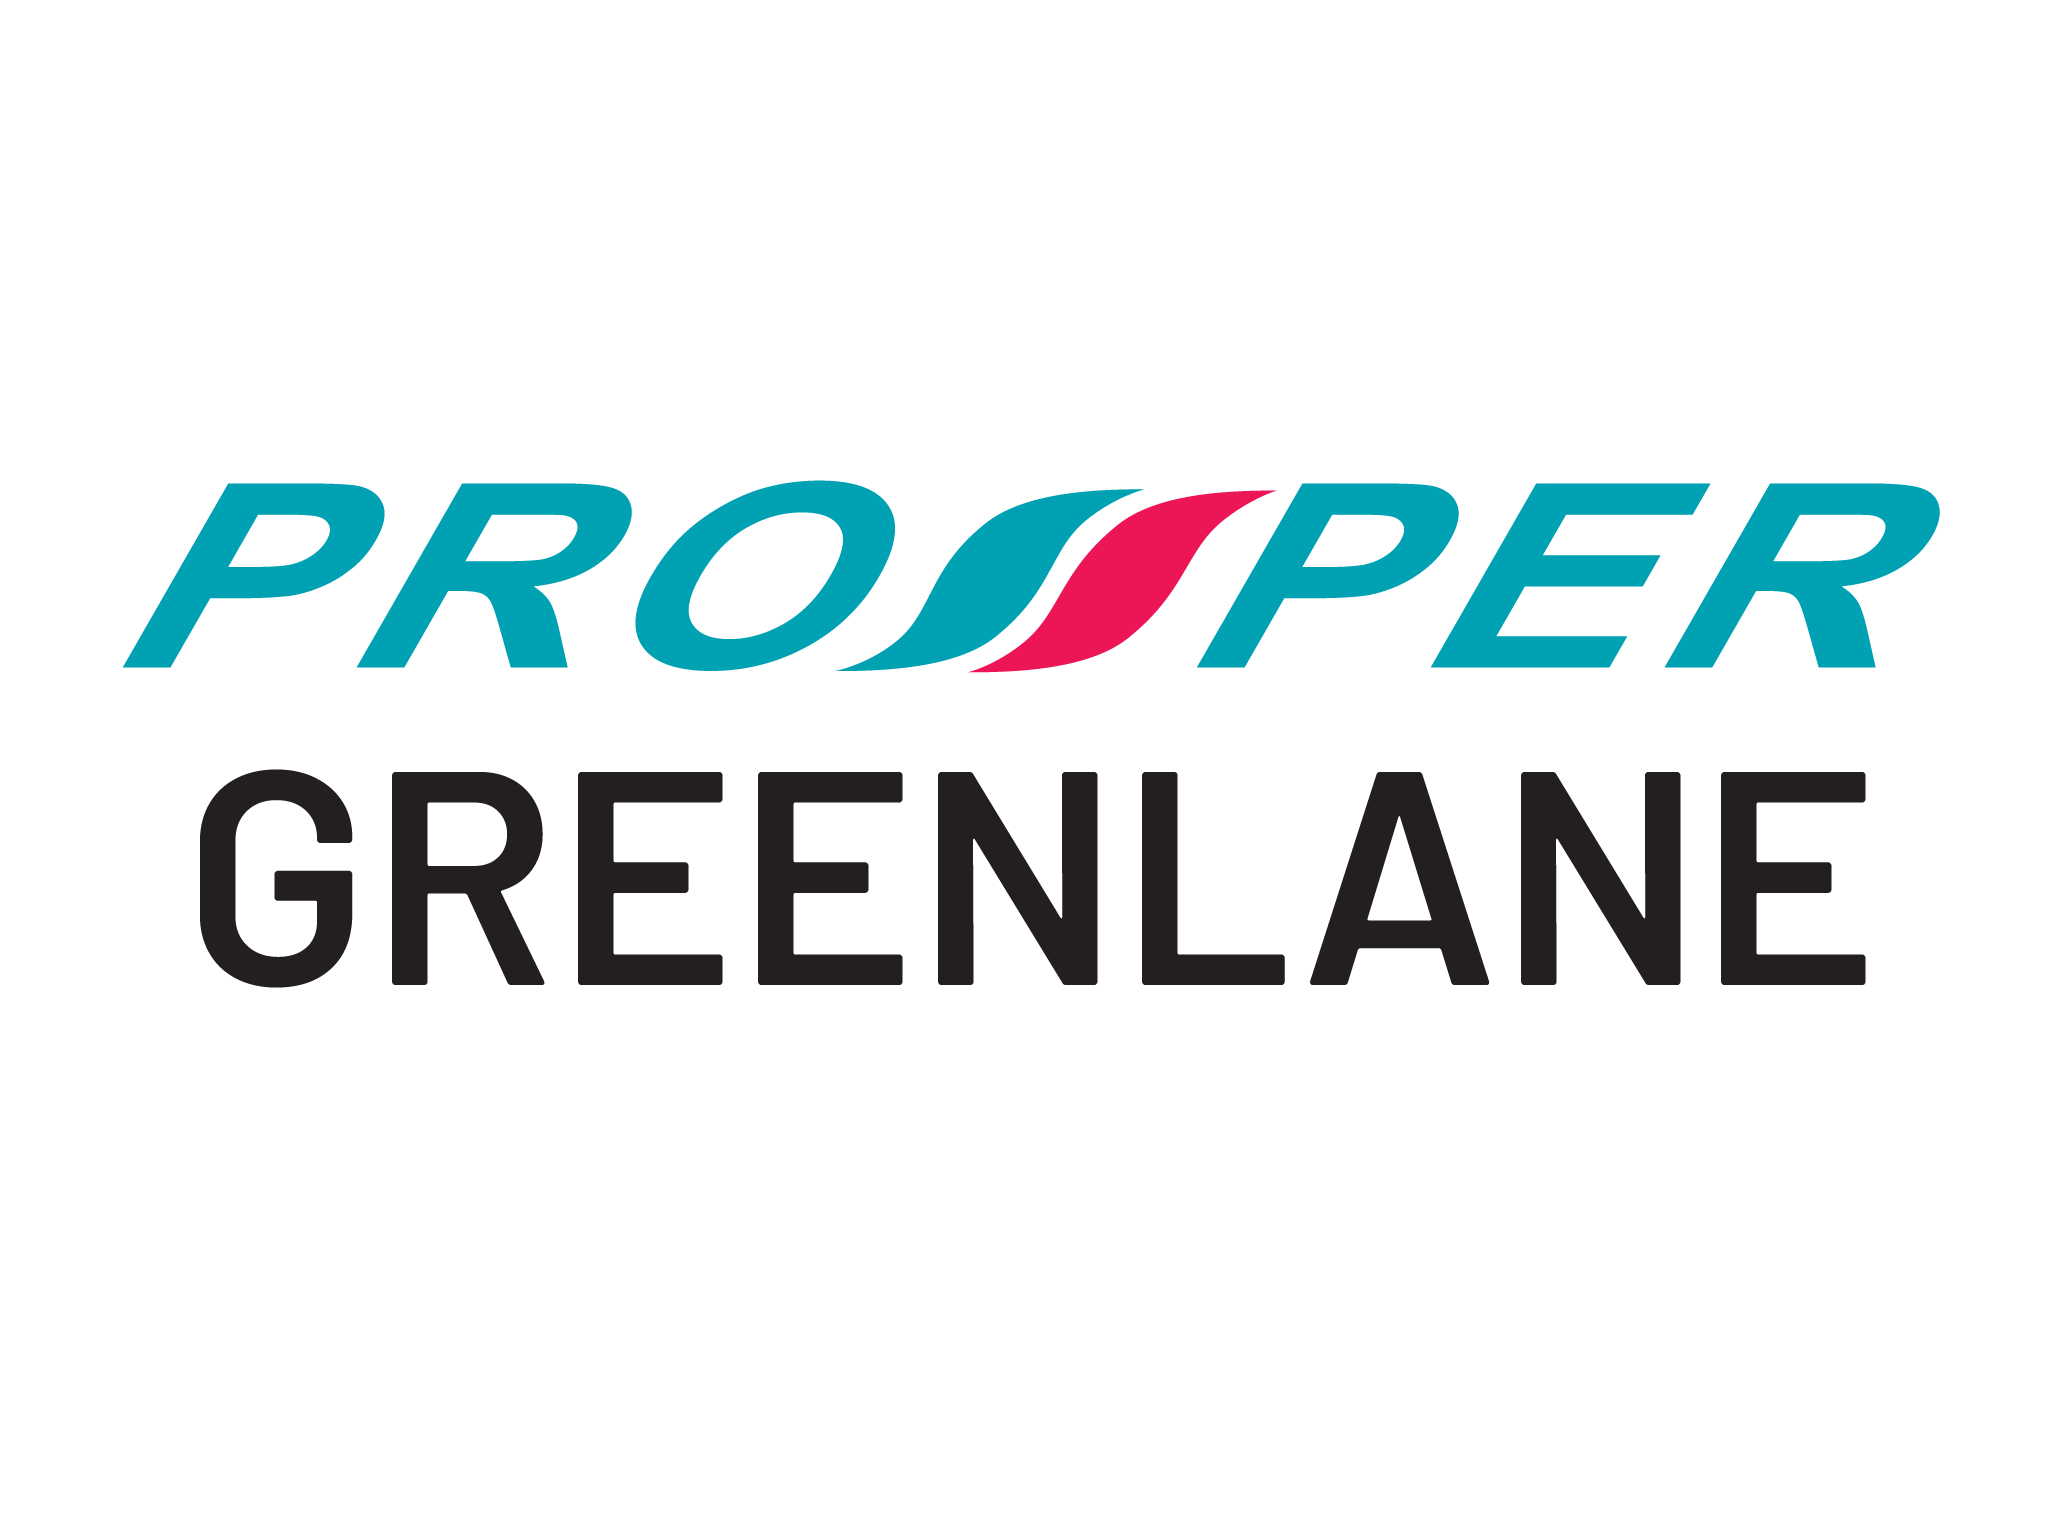 PROSPER Greenlane - An additional financing package for Rakan Usahawan PUNB to support its working capital needs for contracts secured from reputable organisations/companies/agencies such as the federal or state governments, government-linked companies, multinational companies or statutory bodies.